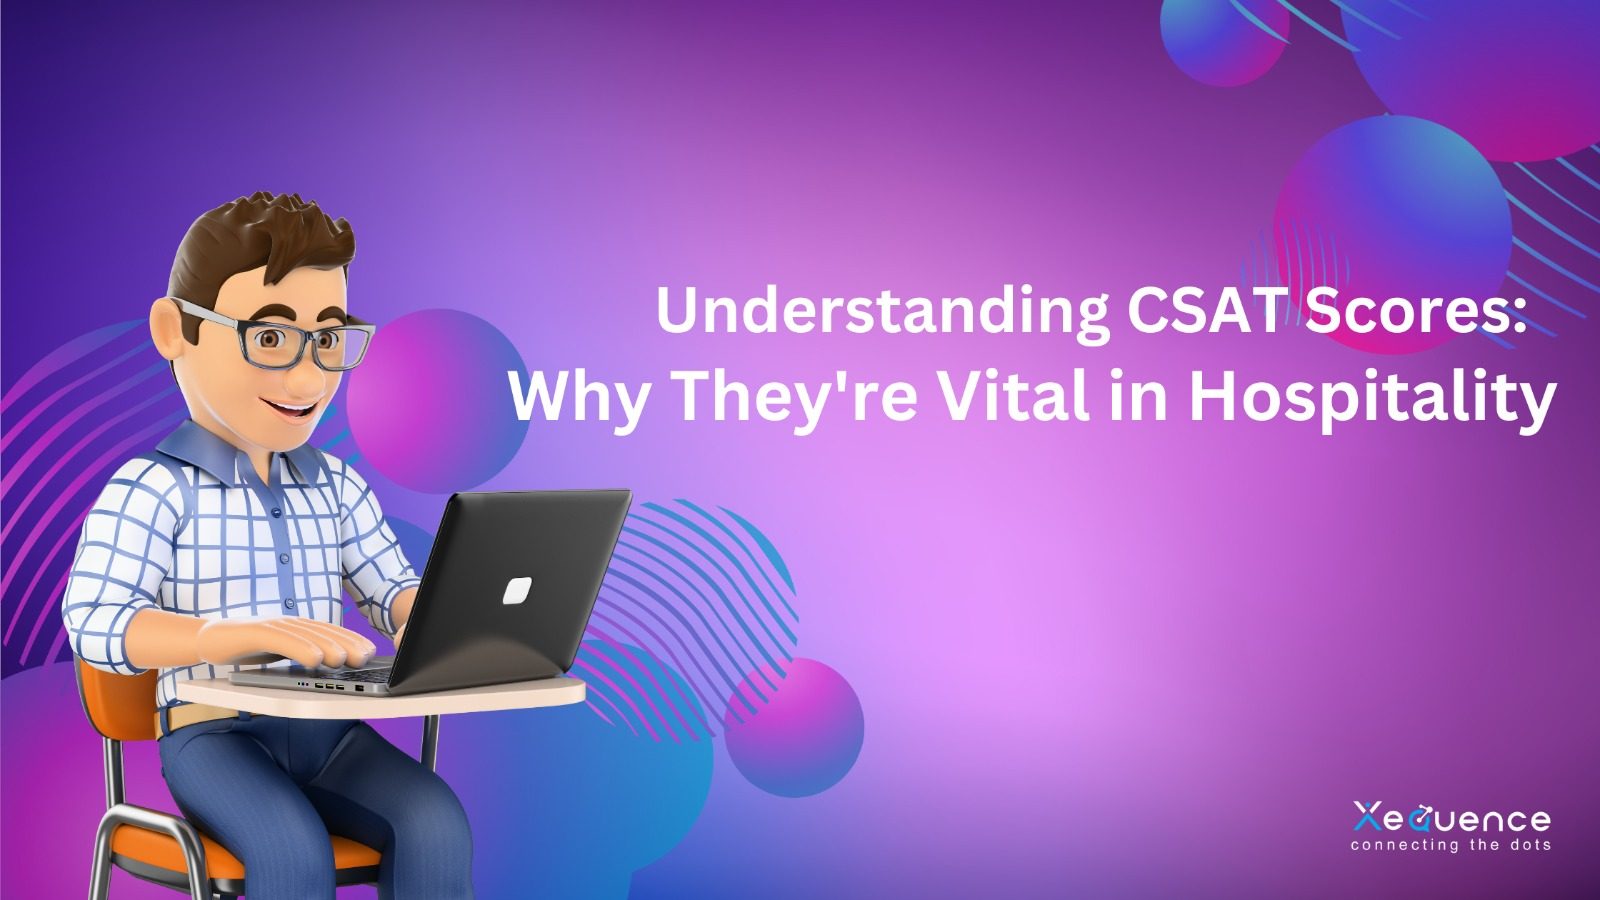 Understanding CSAT Scores: Why They’re Vital in Hospitality